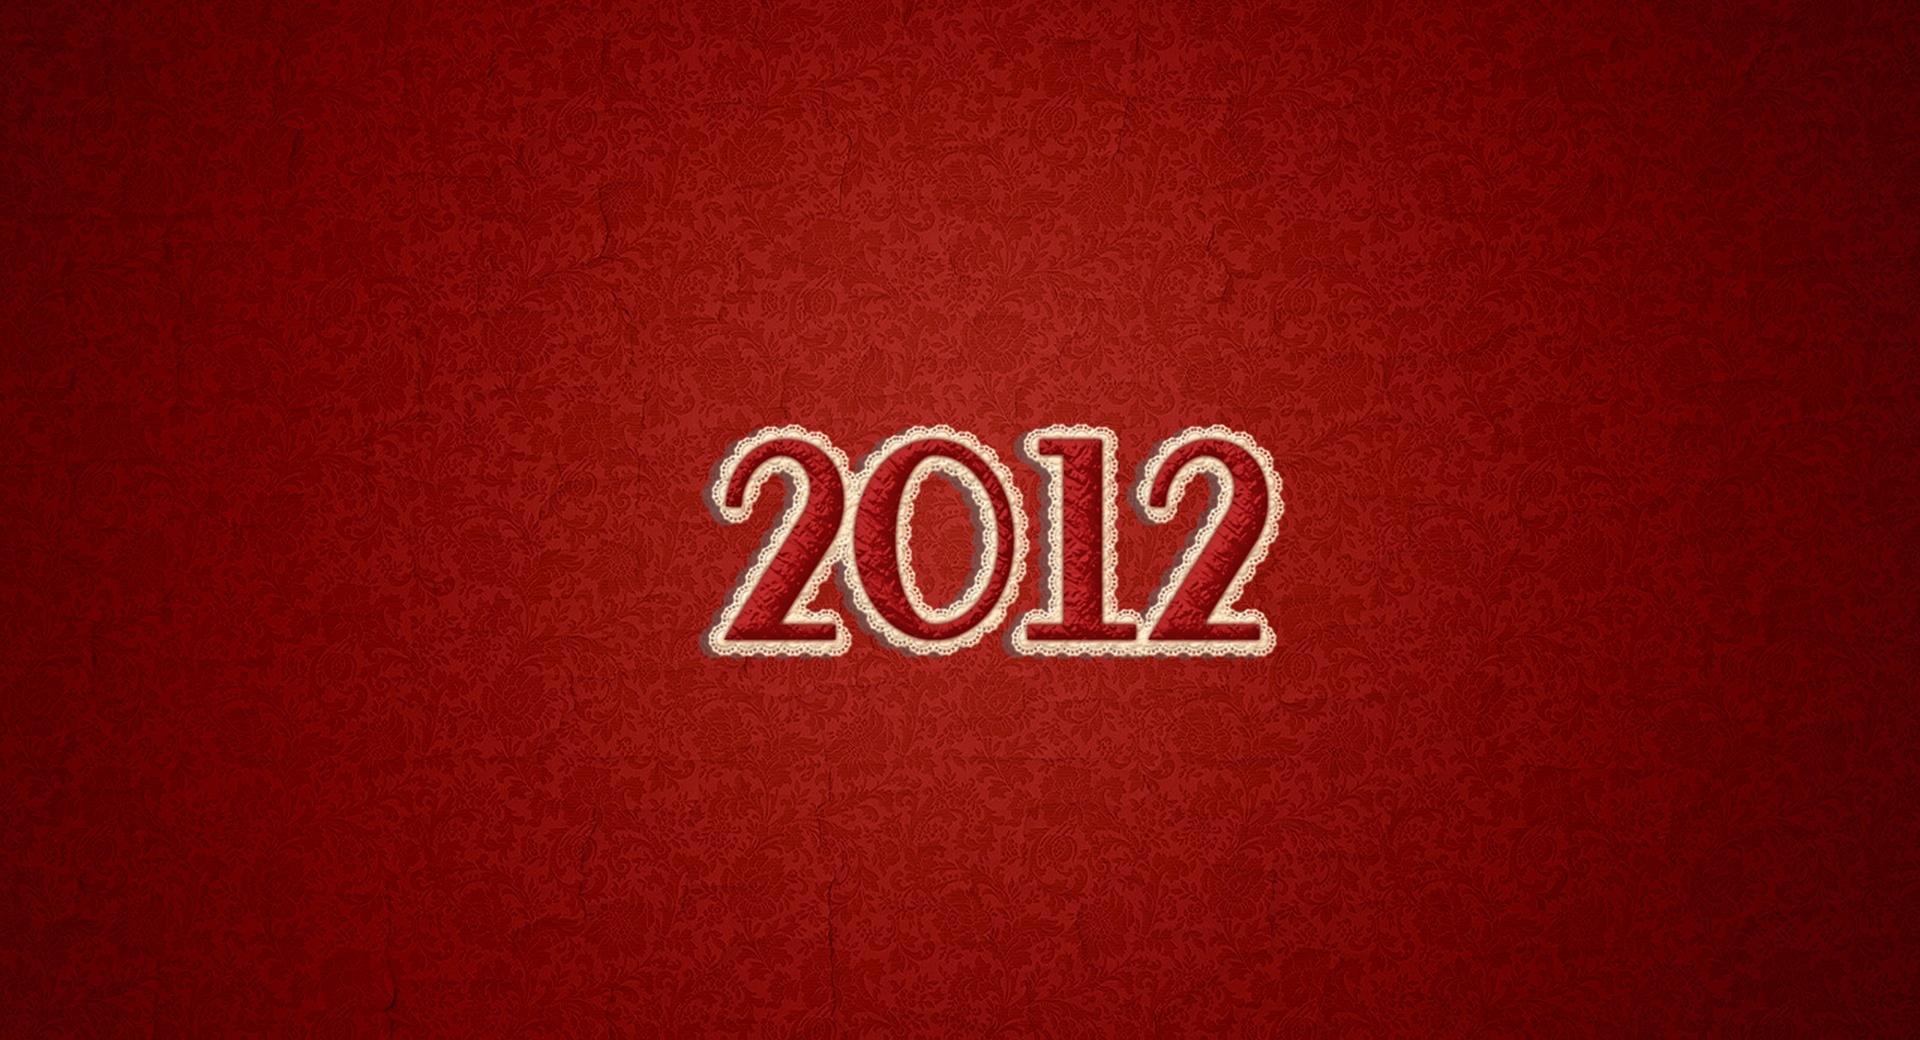 2012 Red Vintage Background wallpapers HD quality